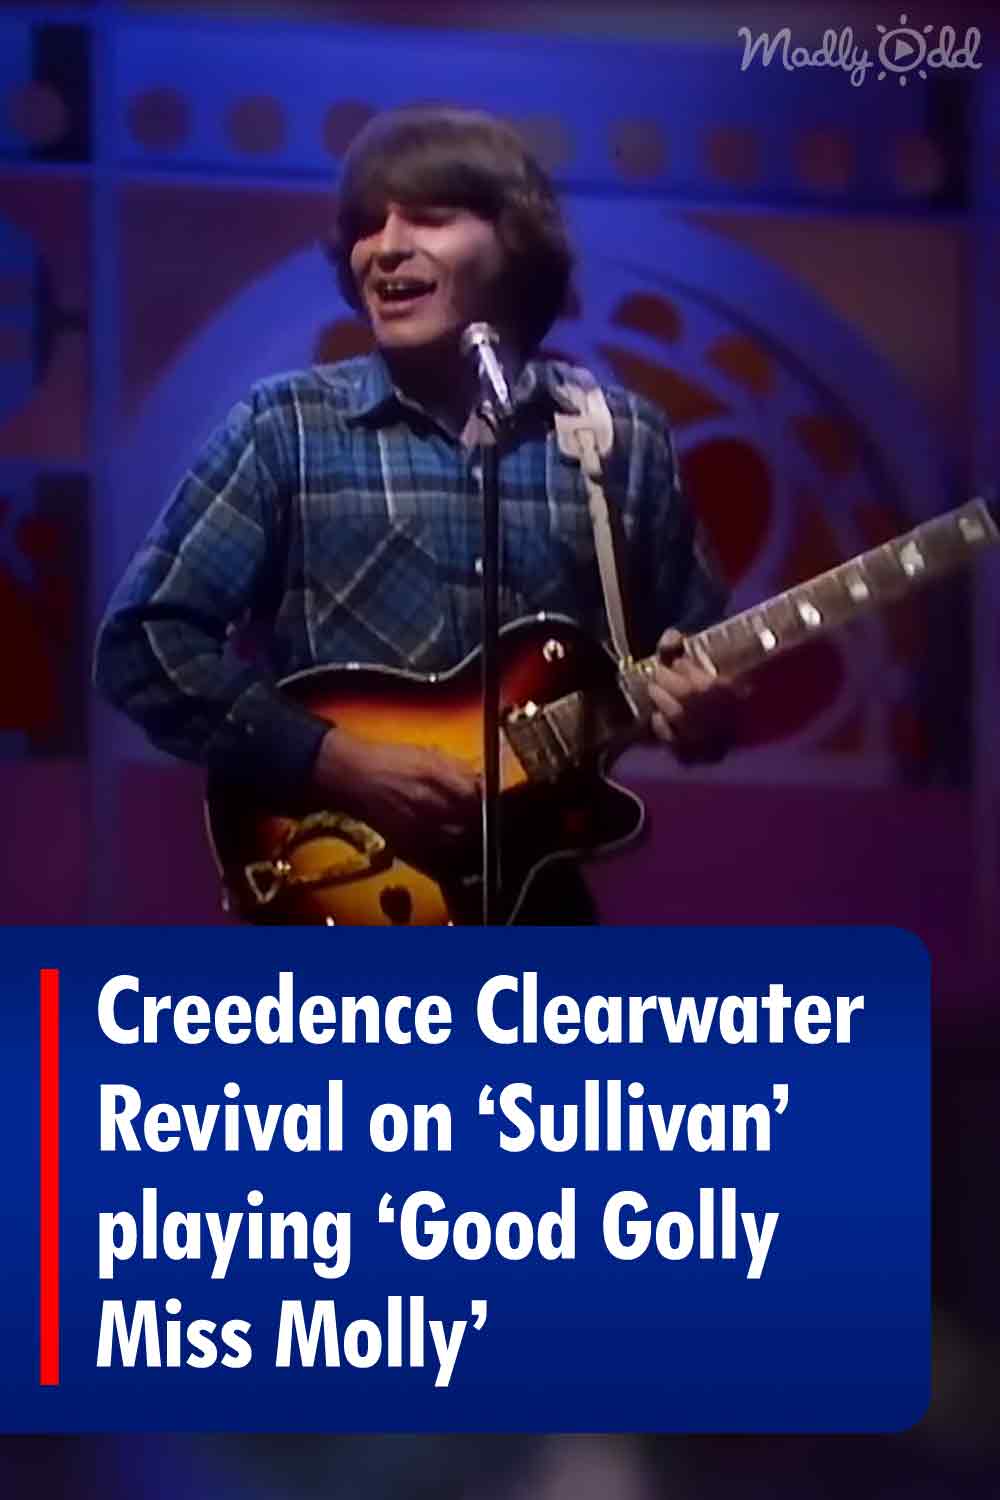 Creedence Clearwater Revival on ‘Sullivan’ playing ‘Good Golly Miss Molly’